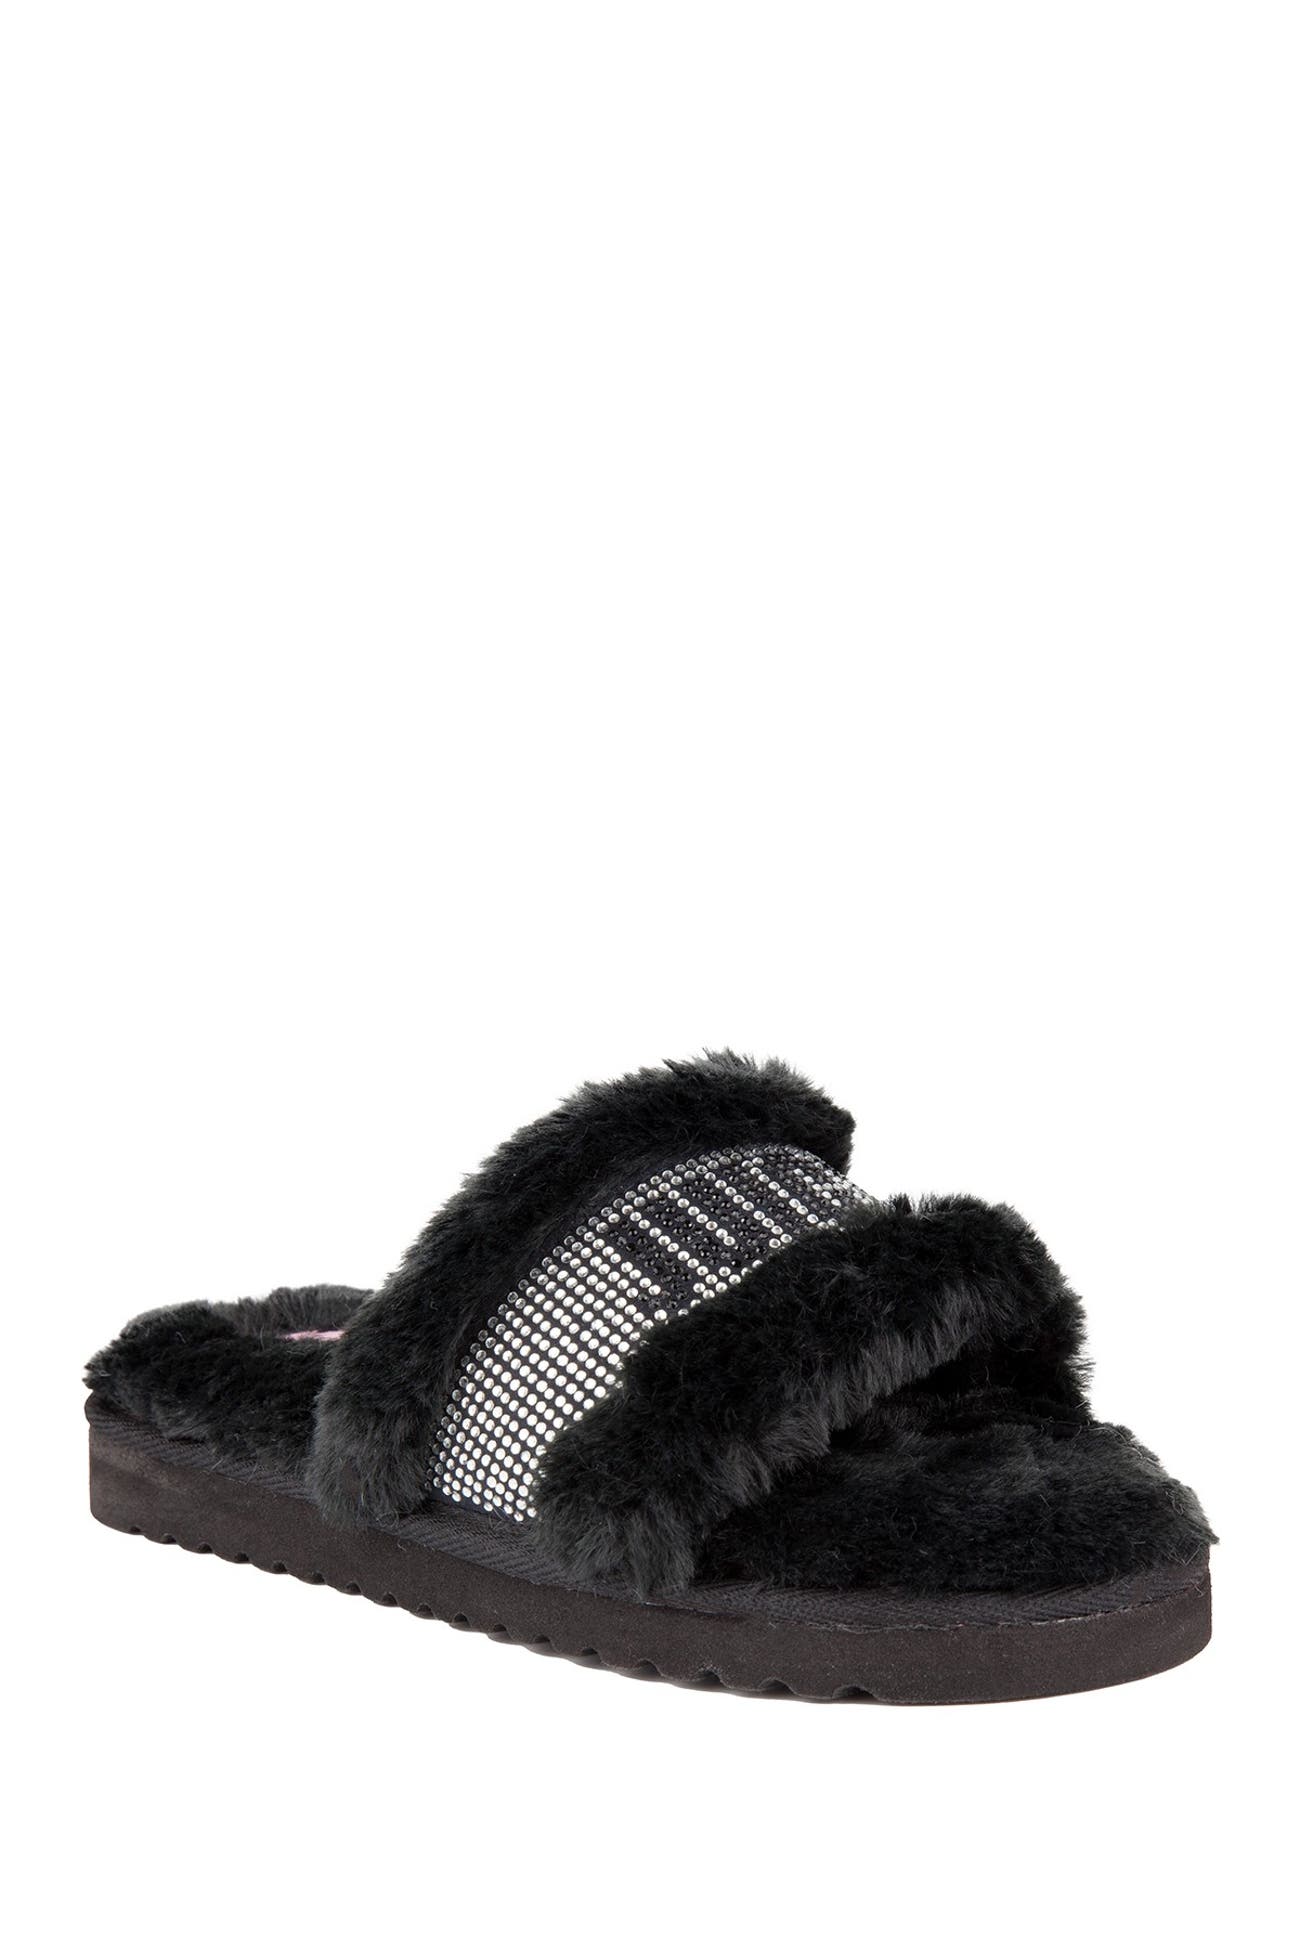 Juicy Couture | Halo Slipper | Nordstrom Rack